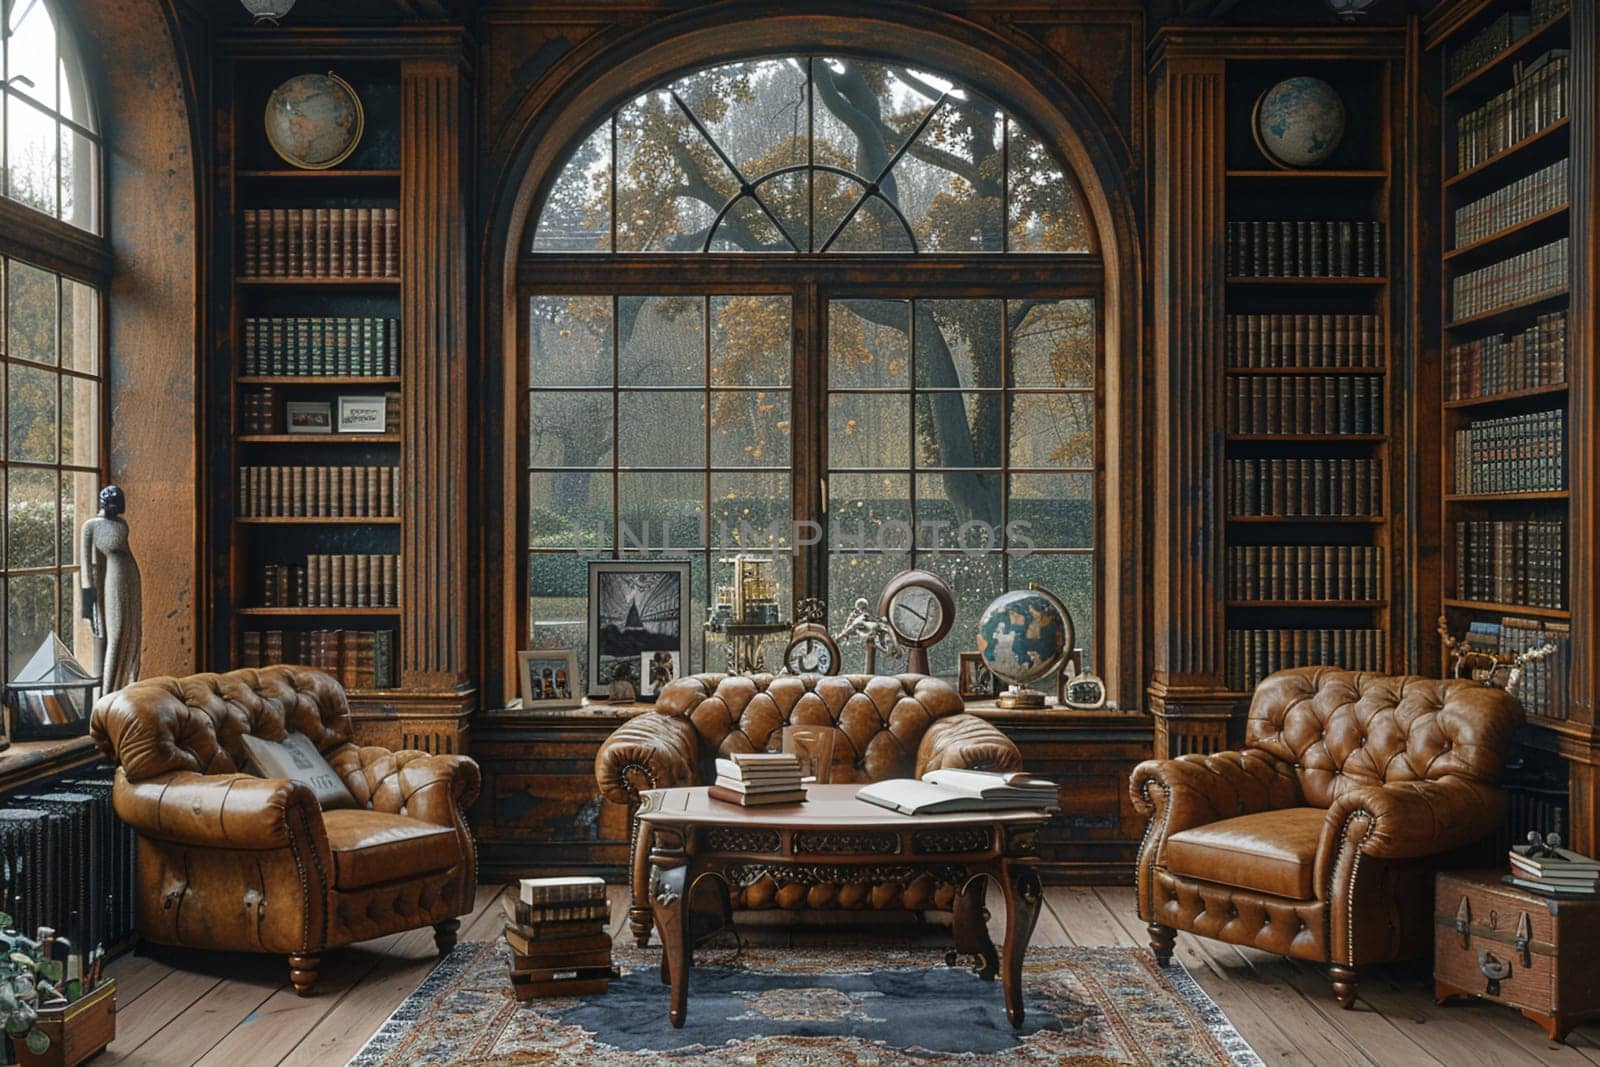 Vintage-inspired study with leather-bound books and a classic writing desk